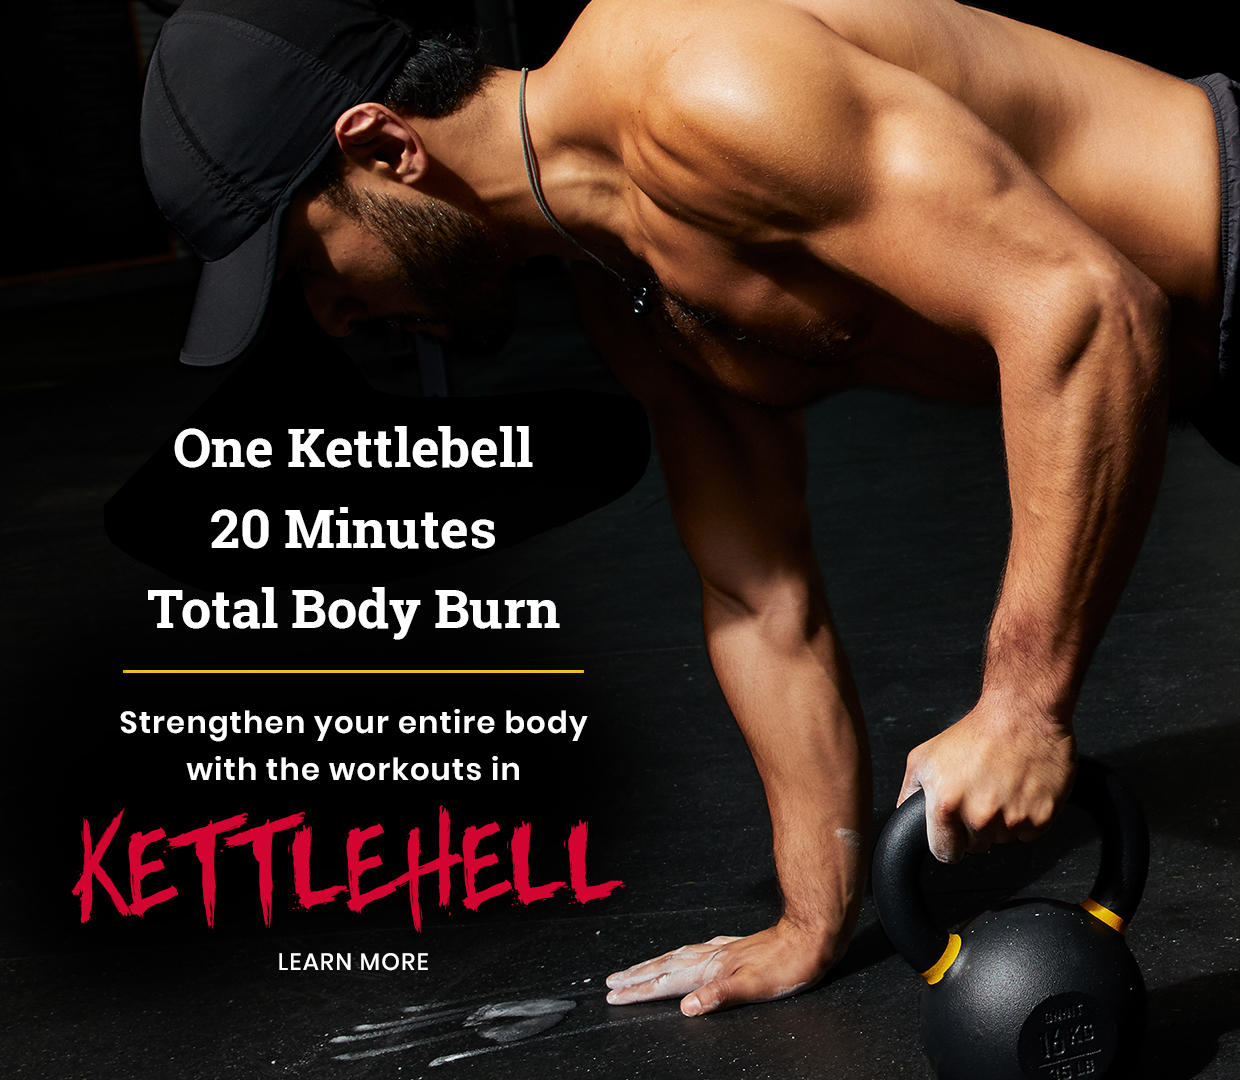 One kettlebell is all you need